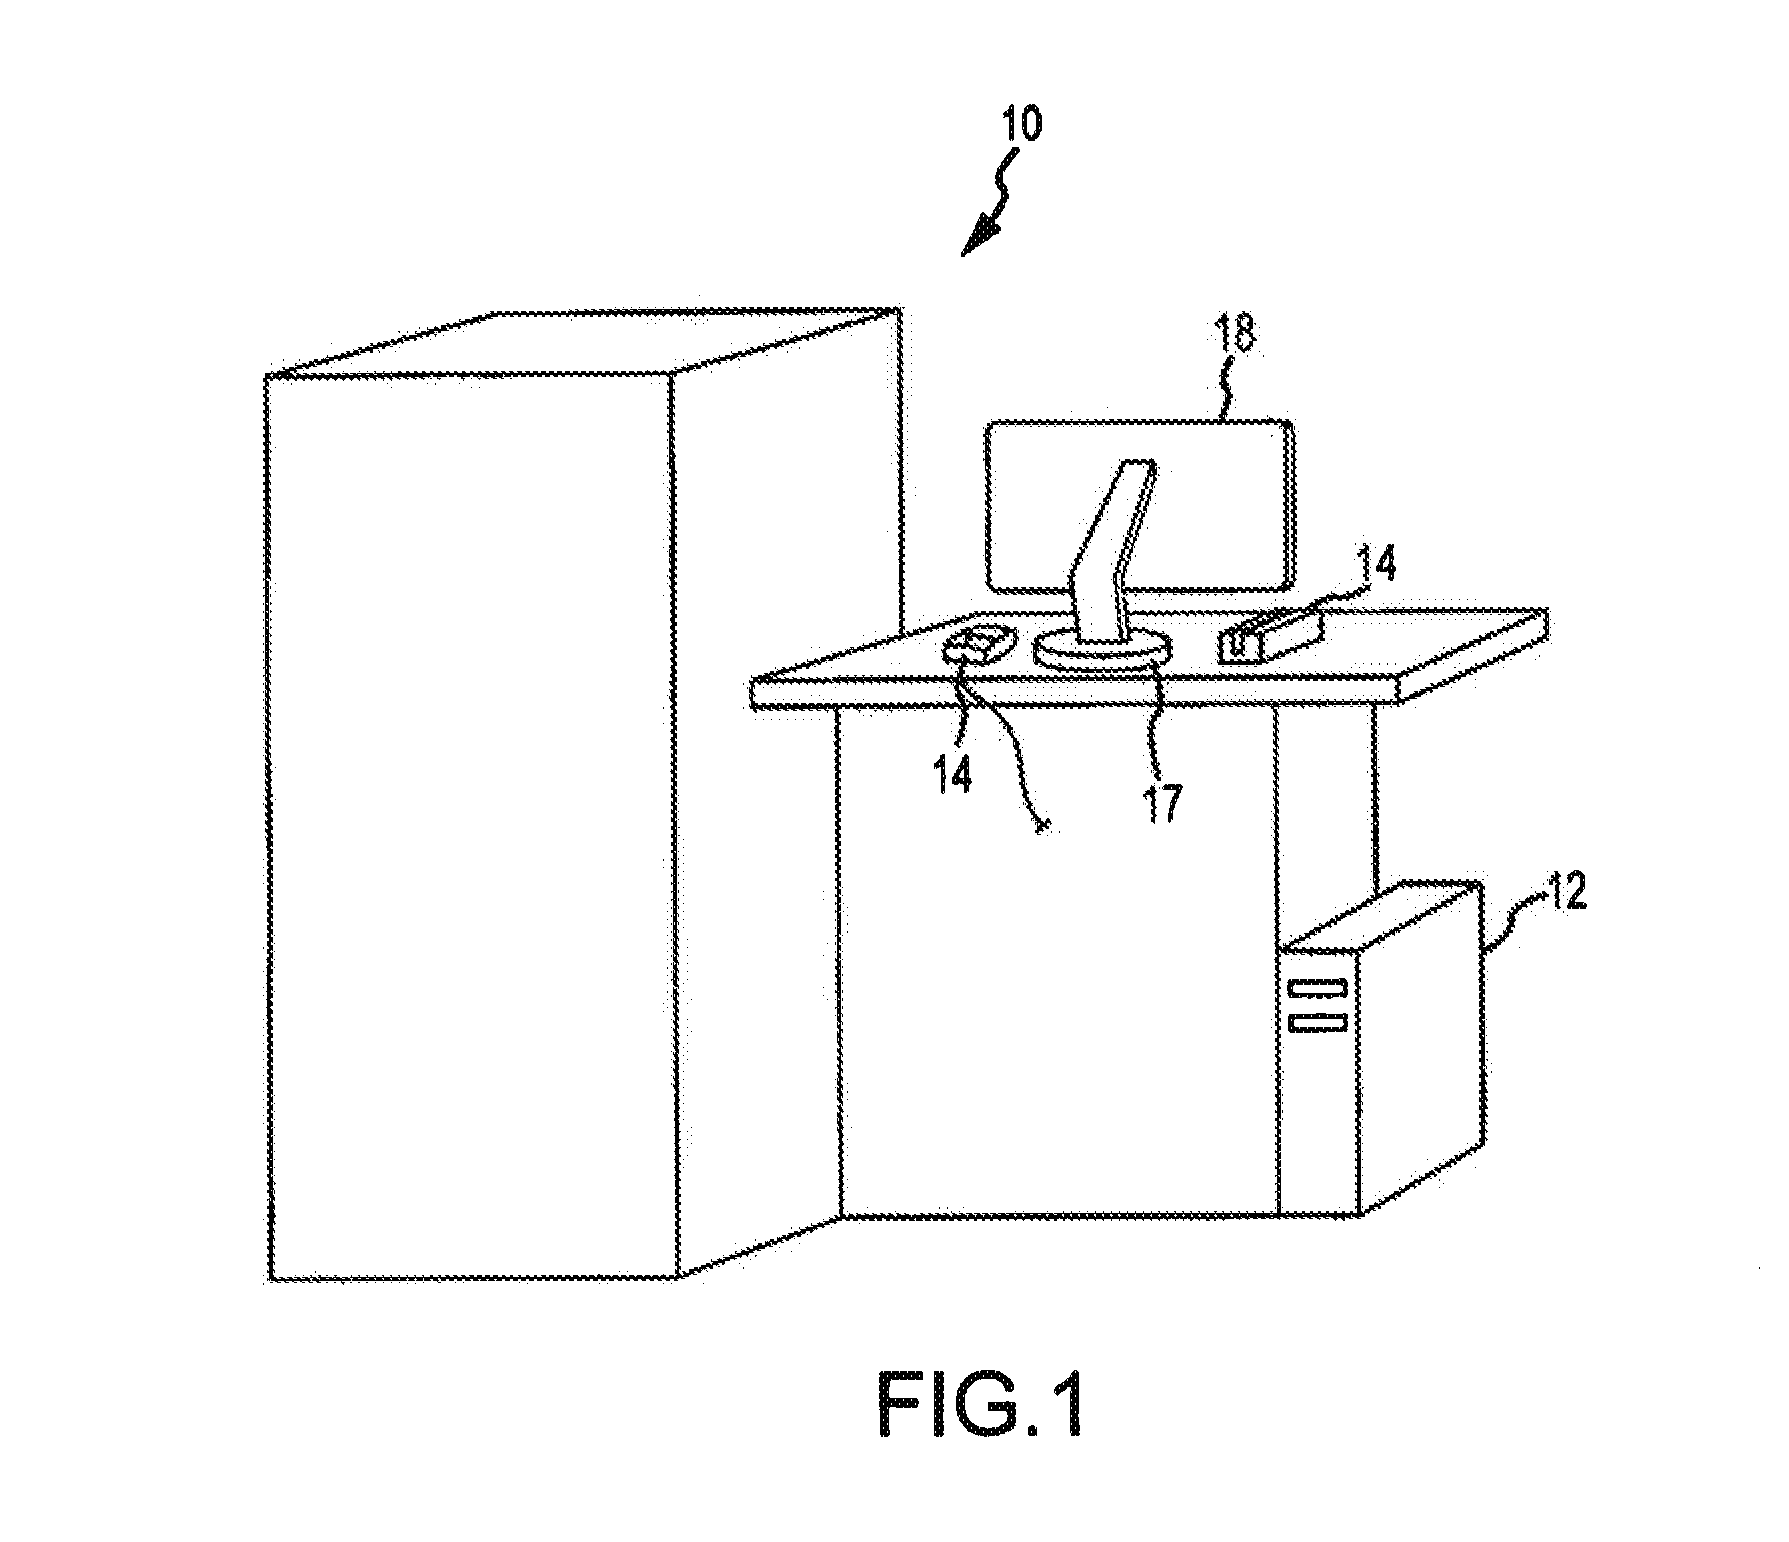 Banking location utilizing secure transaction station and method of processing consumer banking transactions